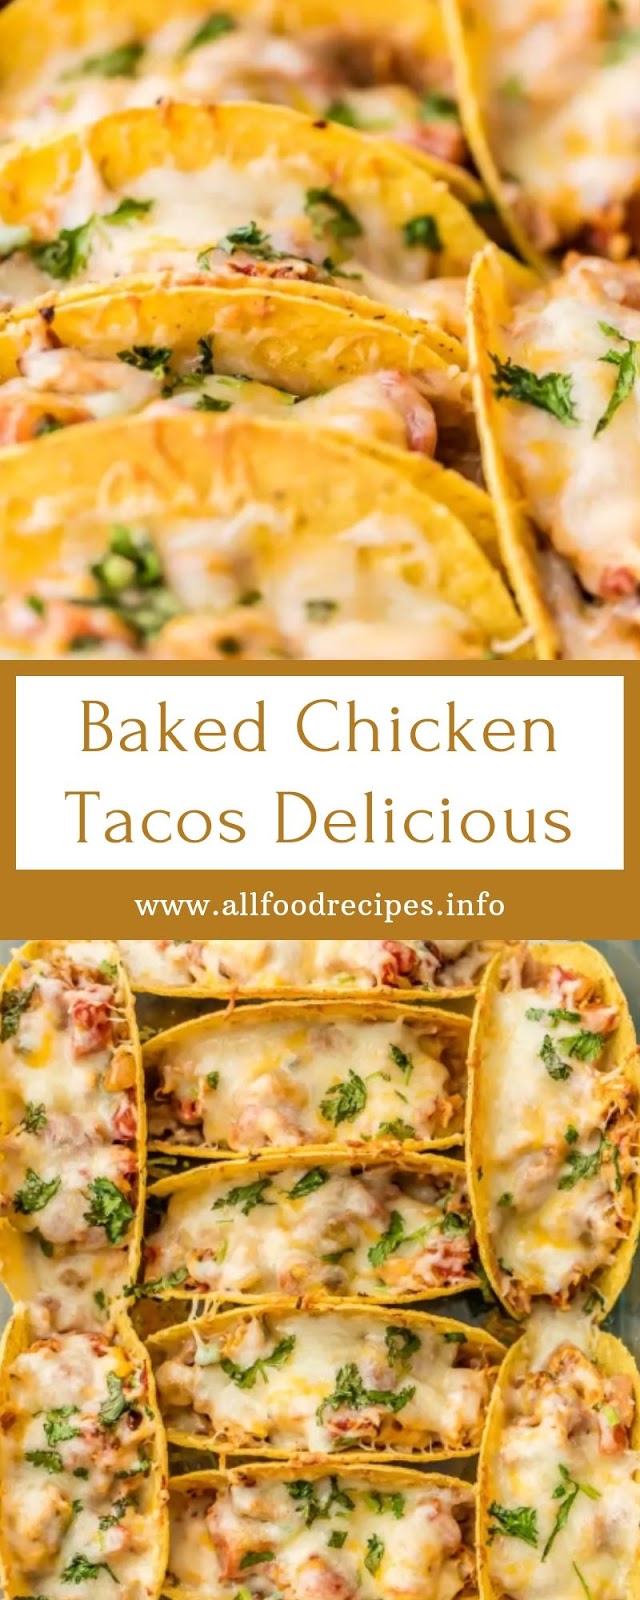 Baked Chicken Tacos Delicious